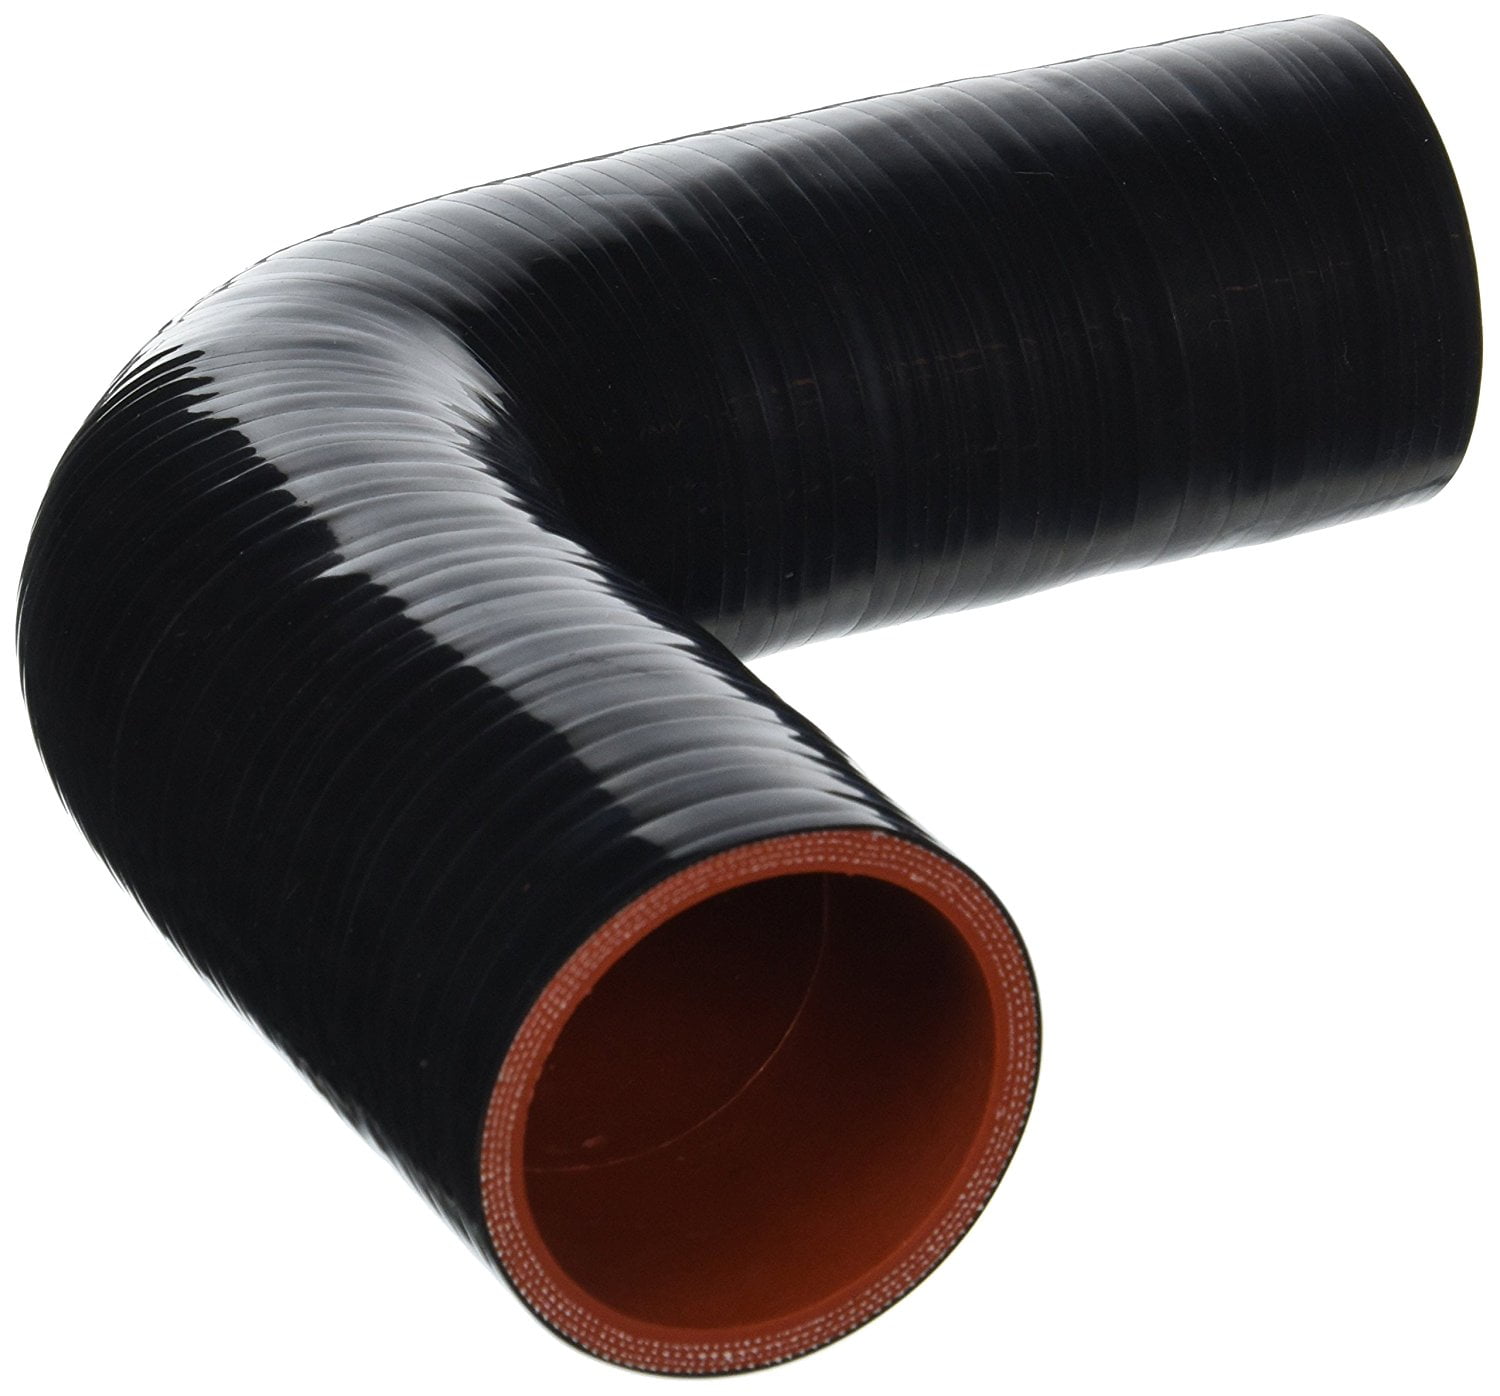 2-5/9 ID Black HPS HTSEC90-256-BLK Silicone High Temperature 4-ply Reinforced 90 degree Elbow Coupler Hose 3.75 Leg Length on each side 55 PSI Maximum Pressure